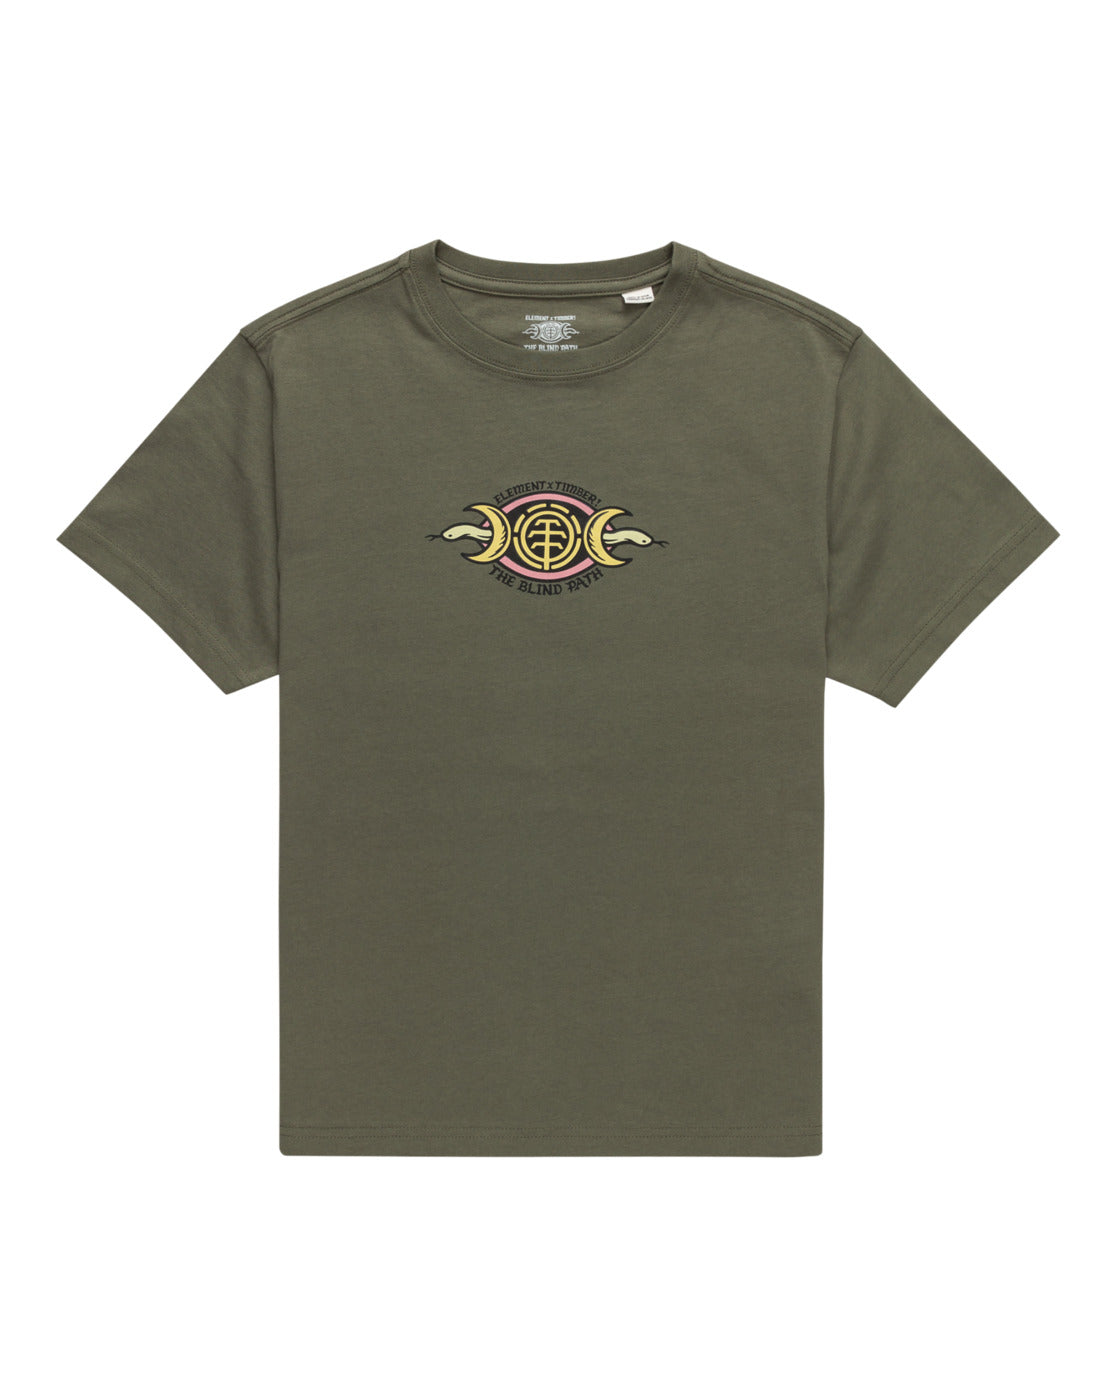 ELEMENT - TIMBER OMEN SS YOUTH TEE - BEETLE